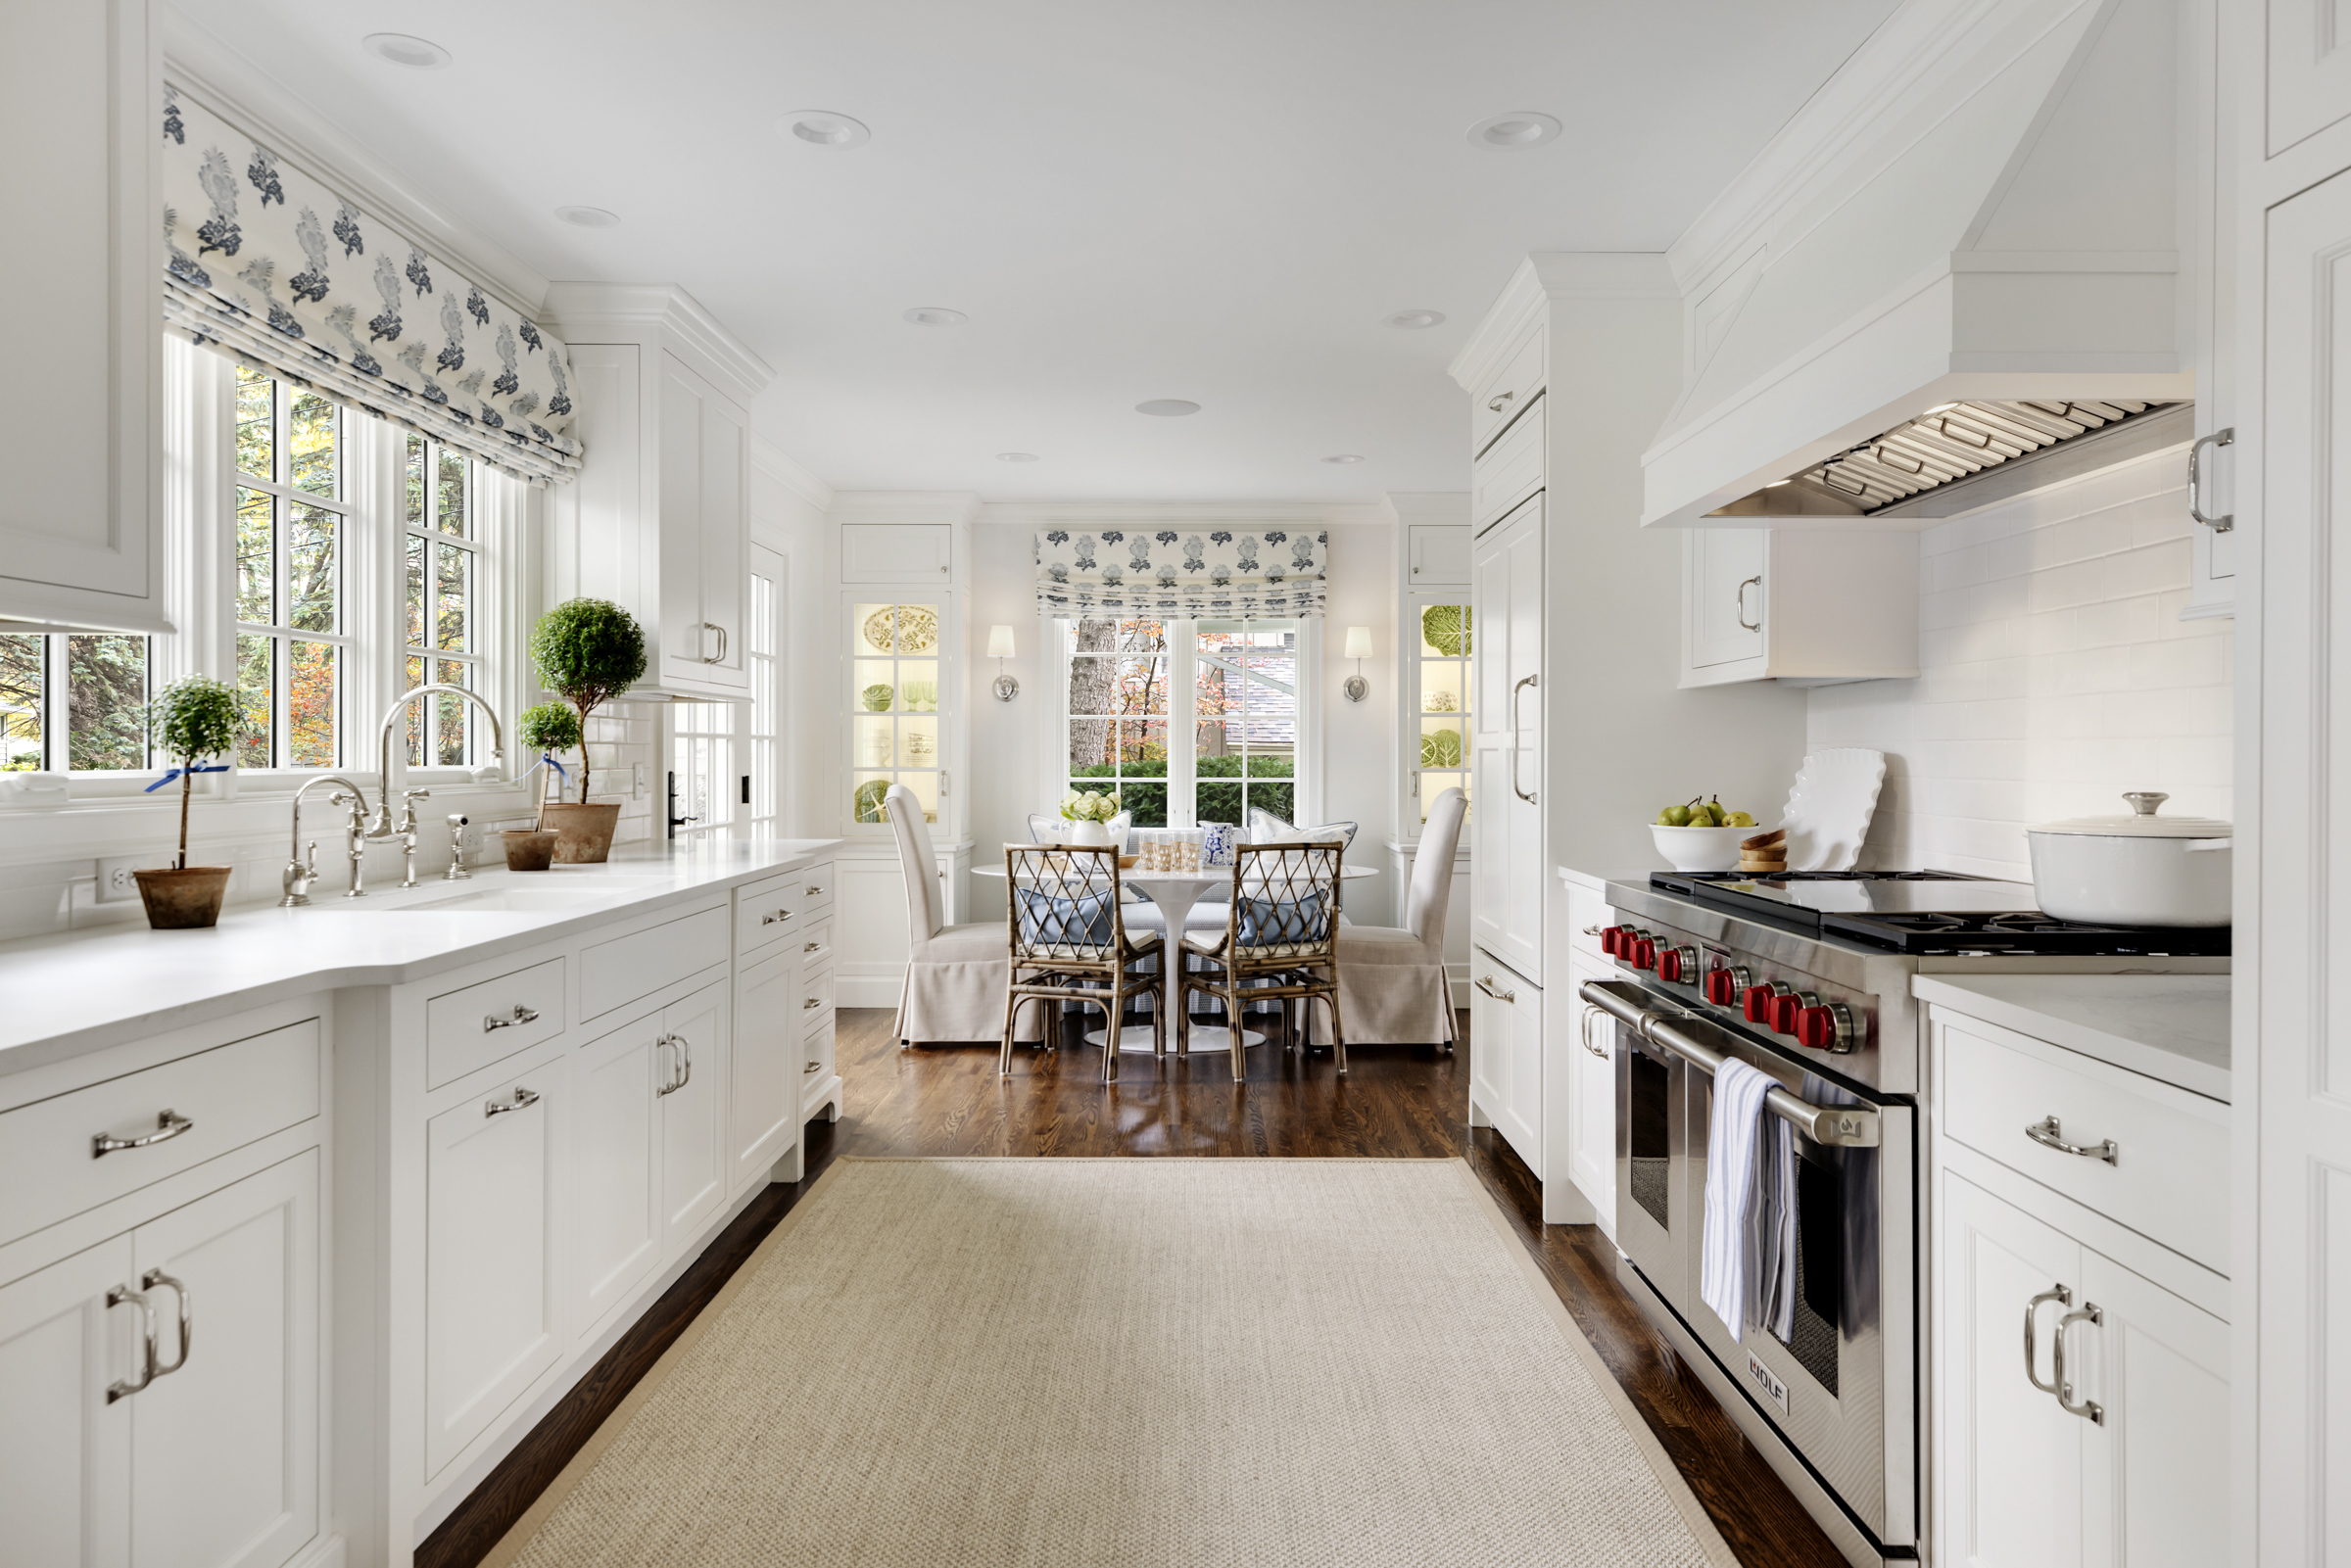 Charming kitchen remodel with white cabinets, high-end appliances, and breakfast nook